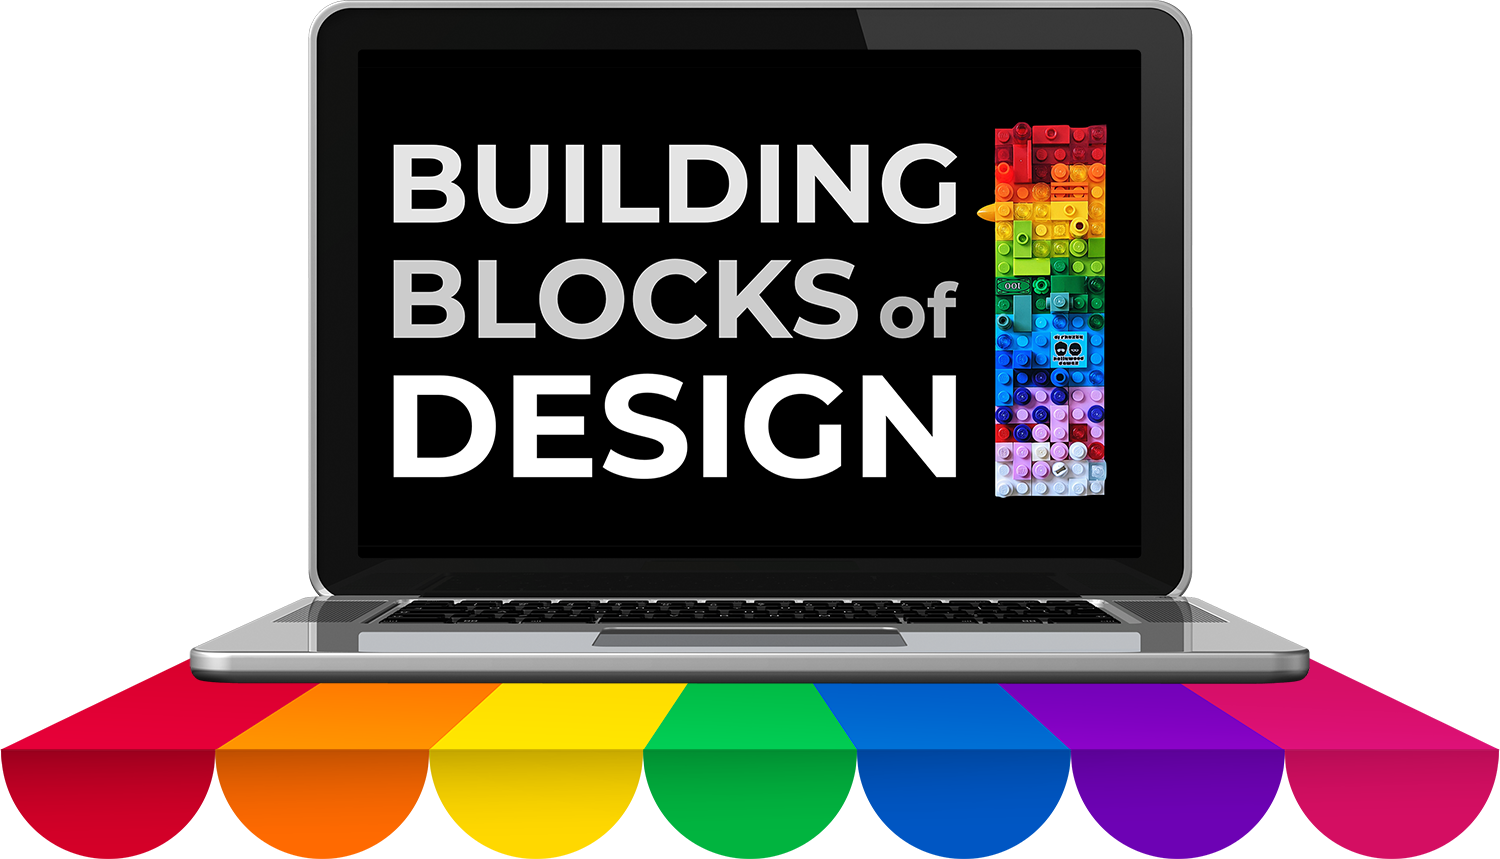 In "Why Design Matters", we then explore the building blocks of design - the elements of your brand and how design can help tell your story